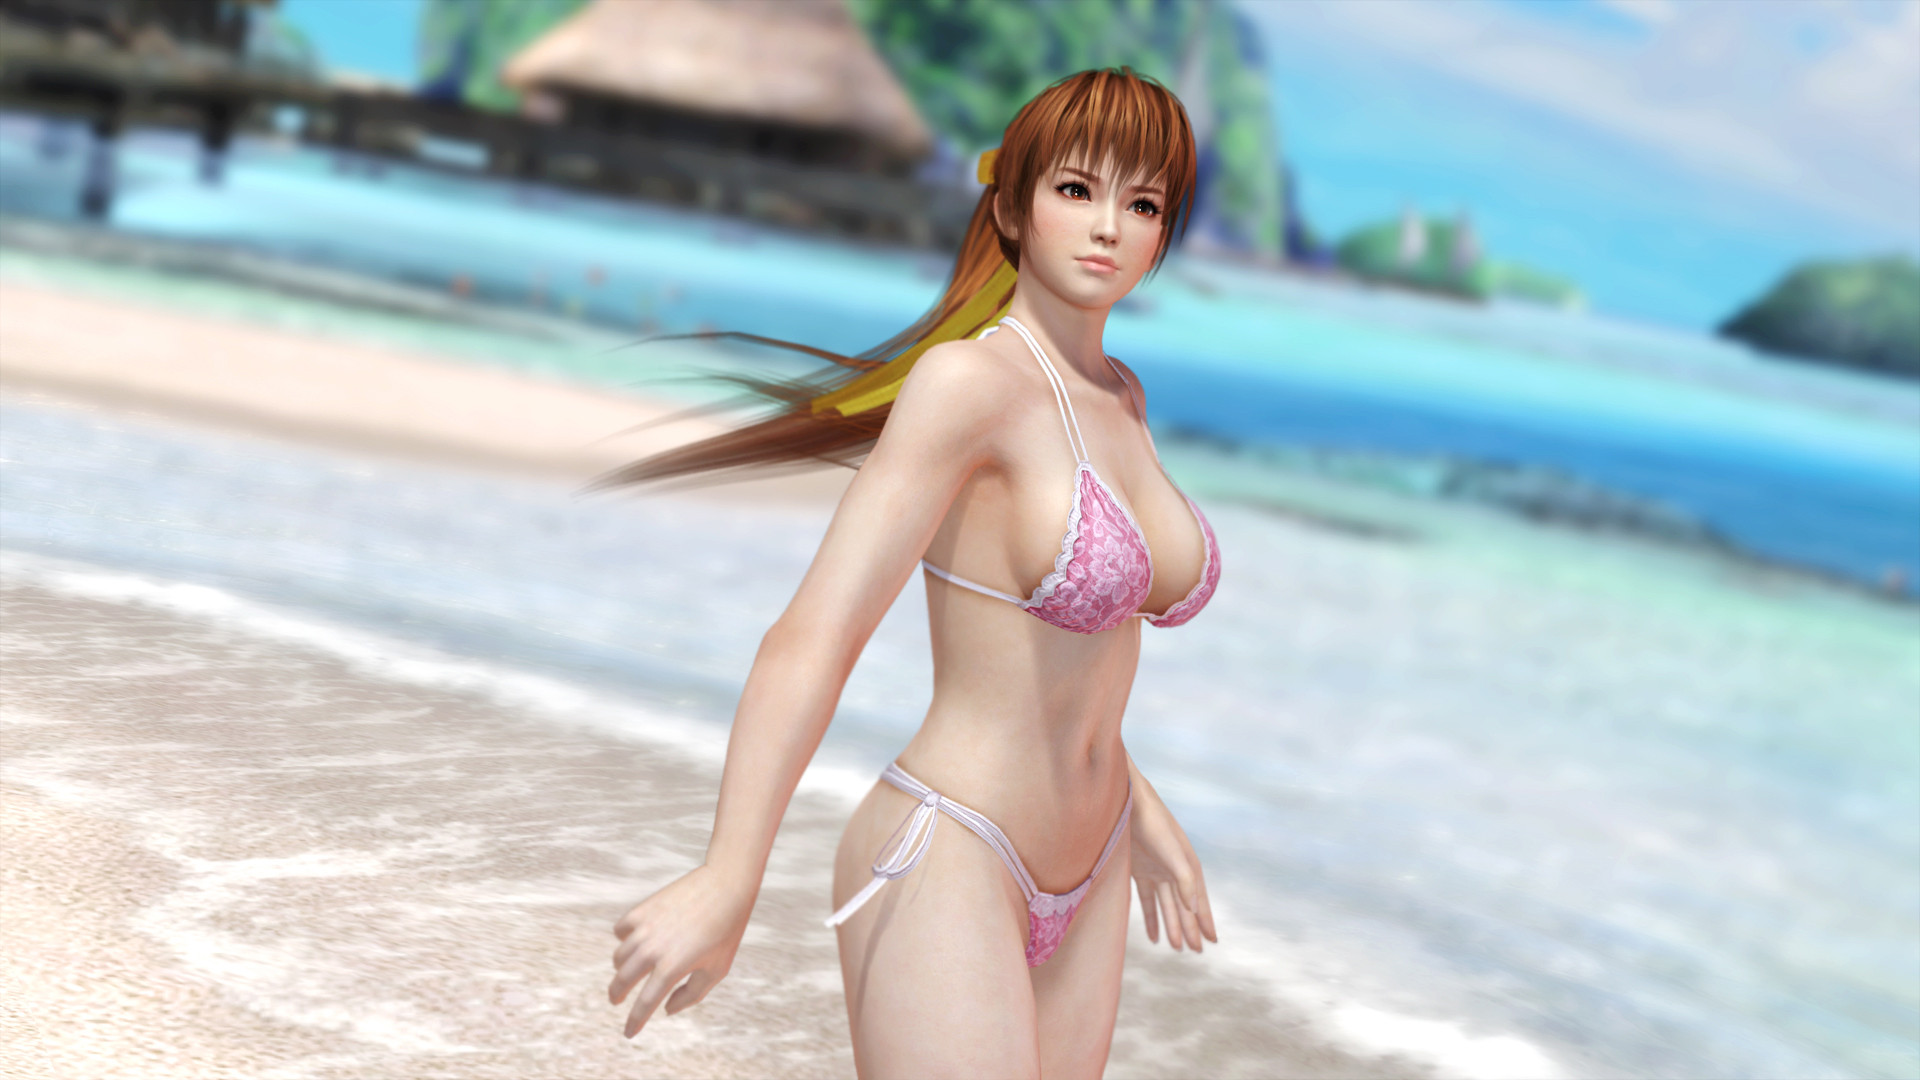 download free dead or alive 5 last round